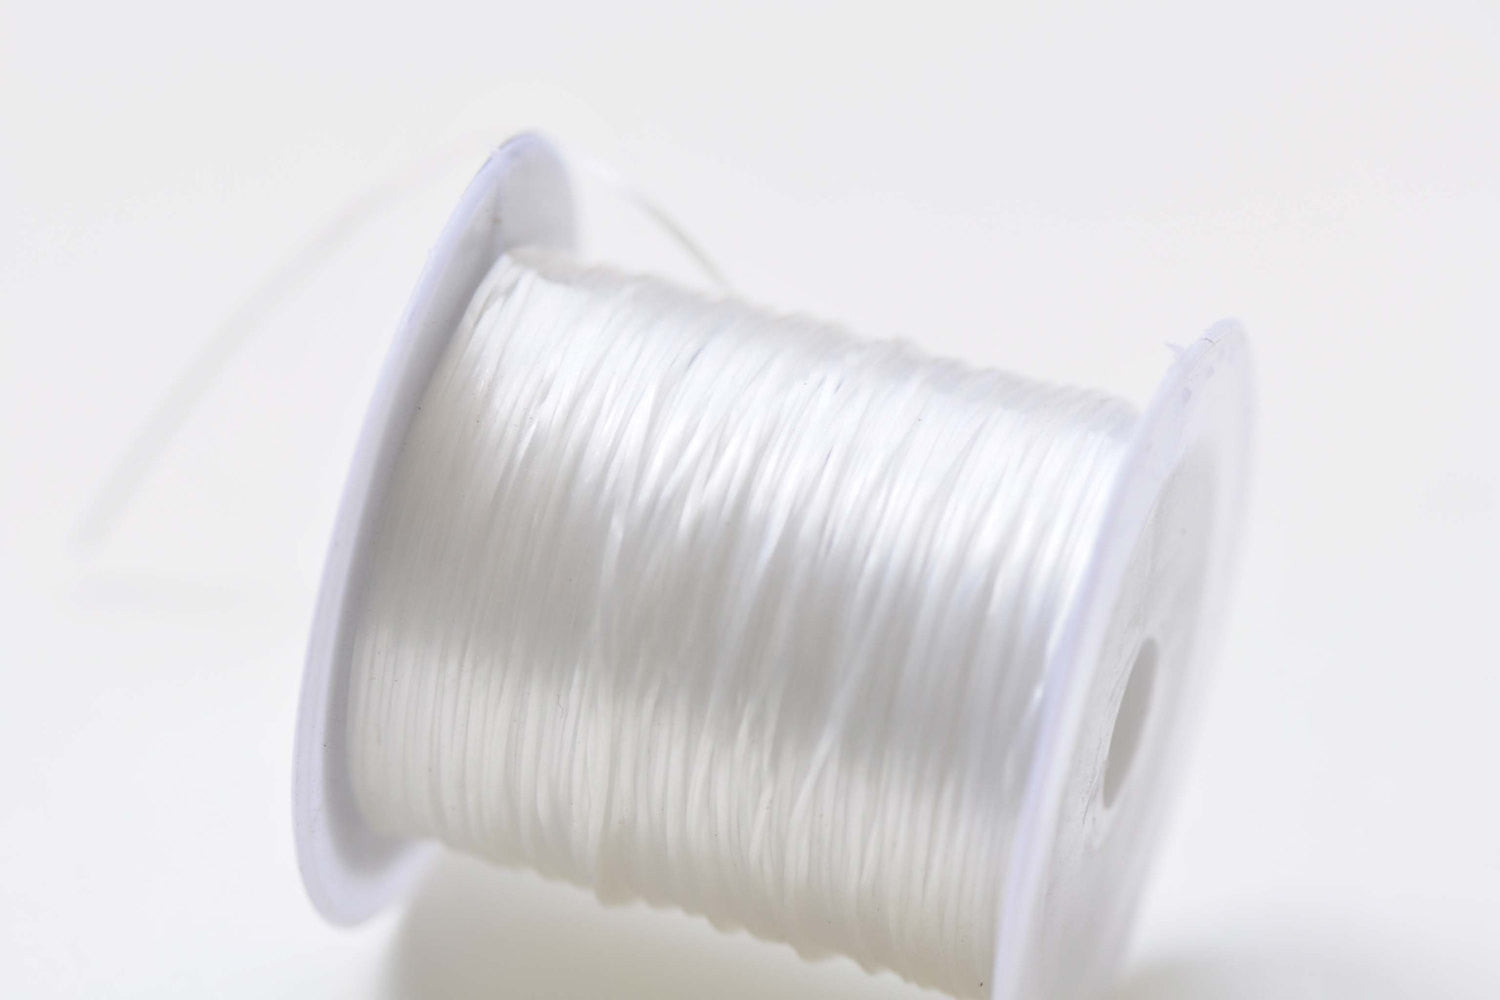 One Spool Strong Stretchy Elastic Cord Beading String 0.8mm – VeryCharms